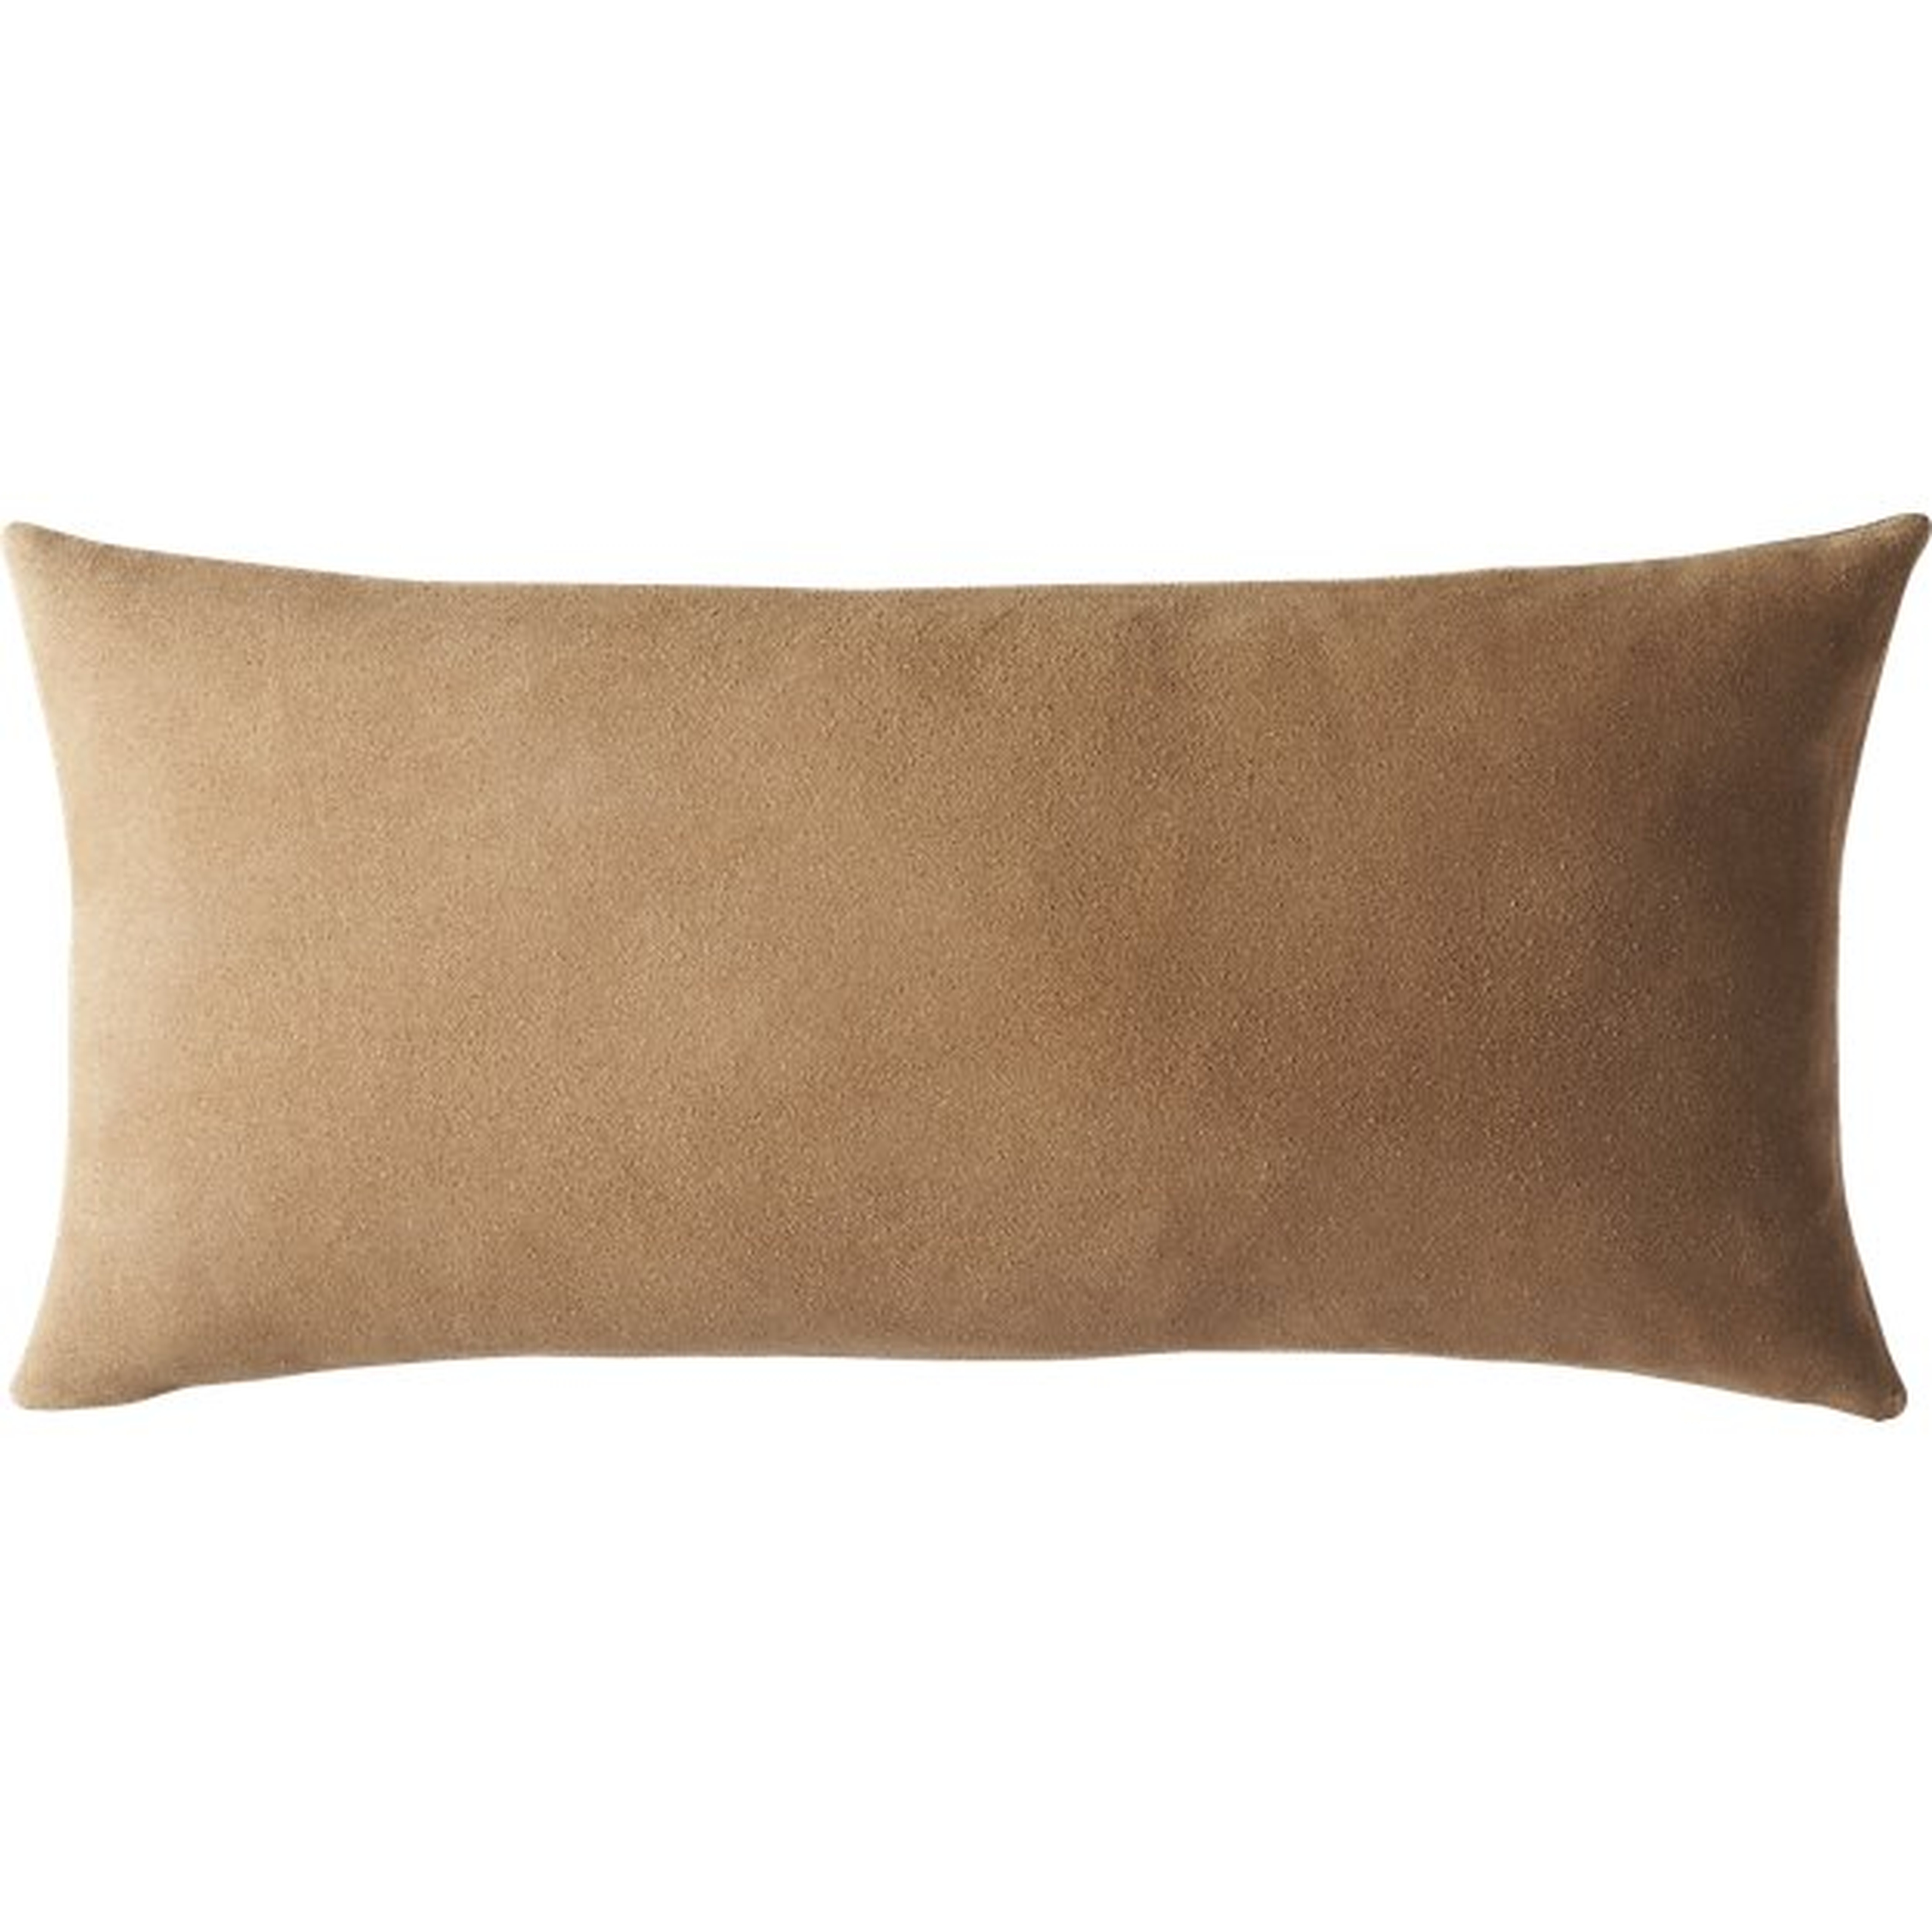 23"X11" SUEDE CAMEL TAN PILLOW WITH FEATHER-DOWN INSERT - CB2